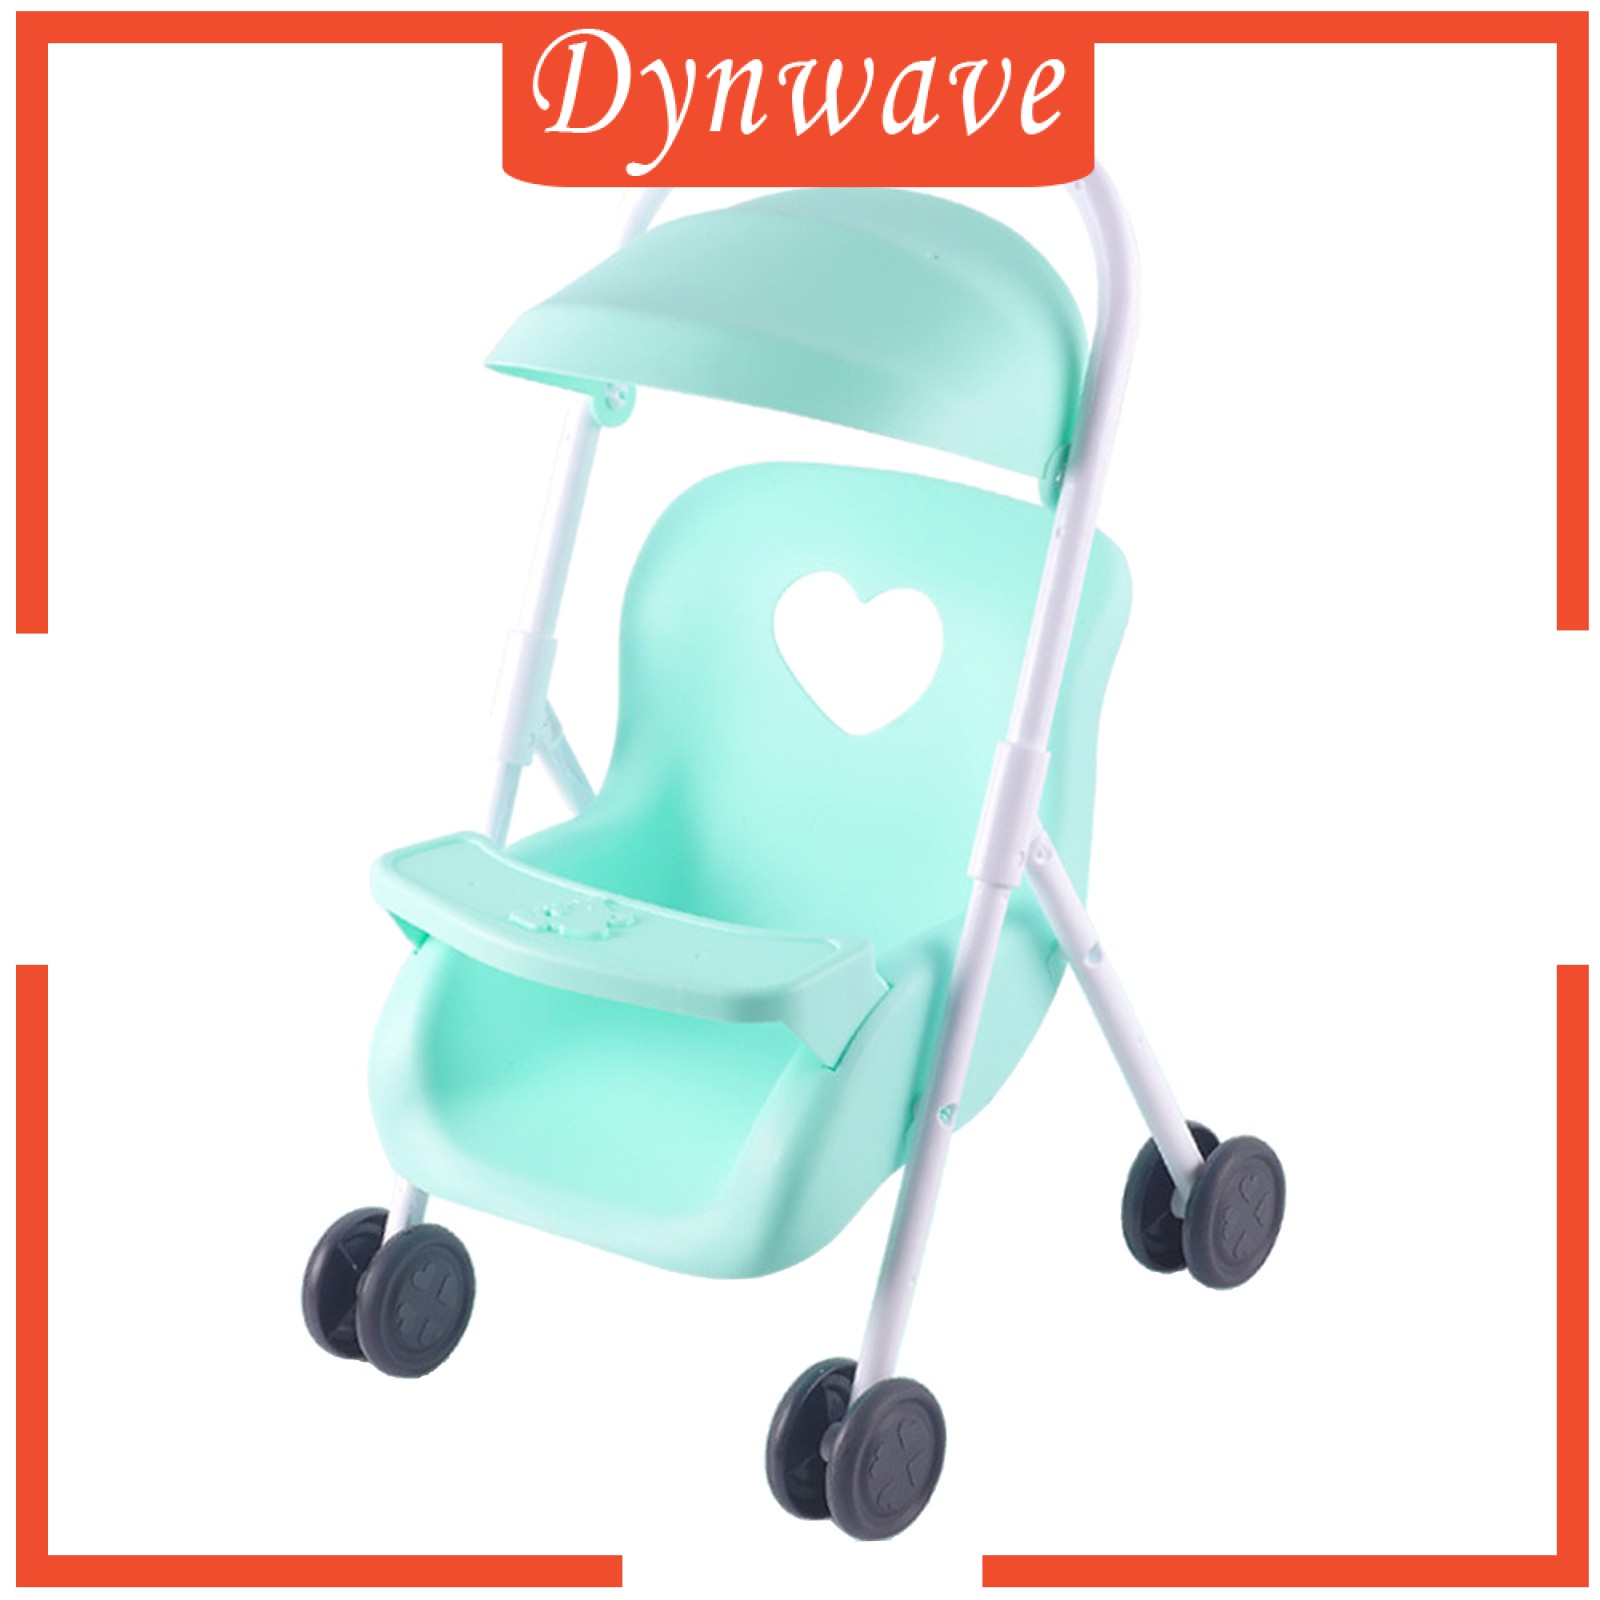 [DYNWAVE] Baby Doll Stroller Pushchairs Foldable Push Cart Toddlers Pretend Play Toy